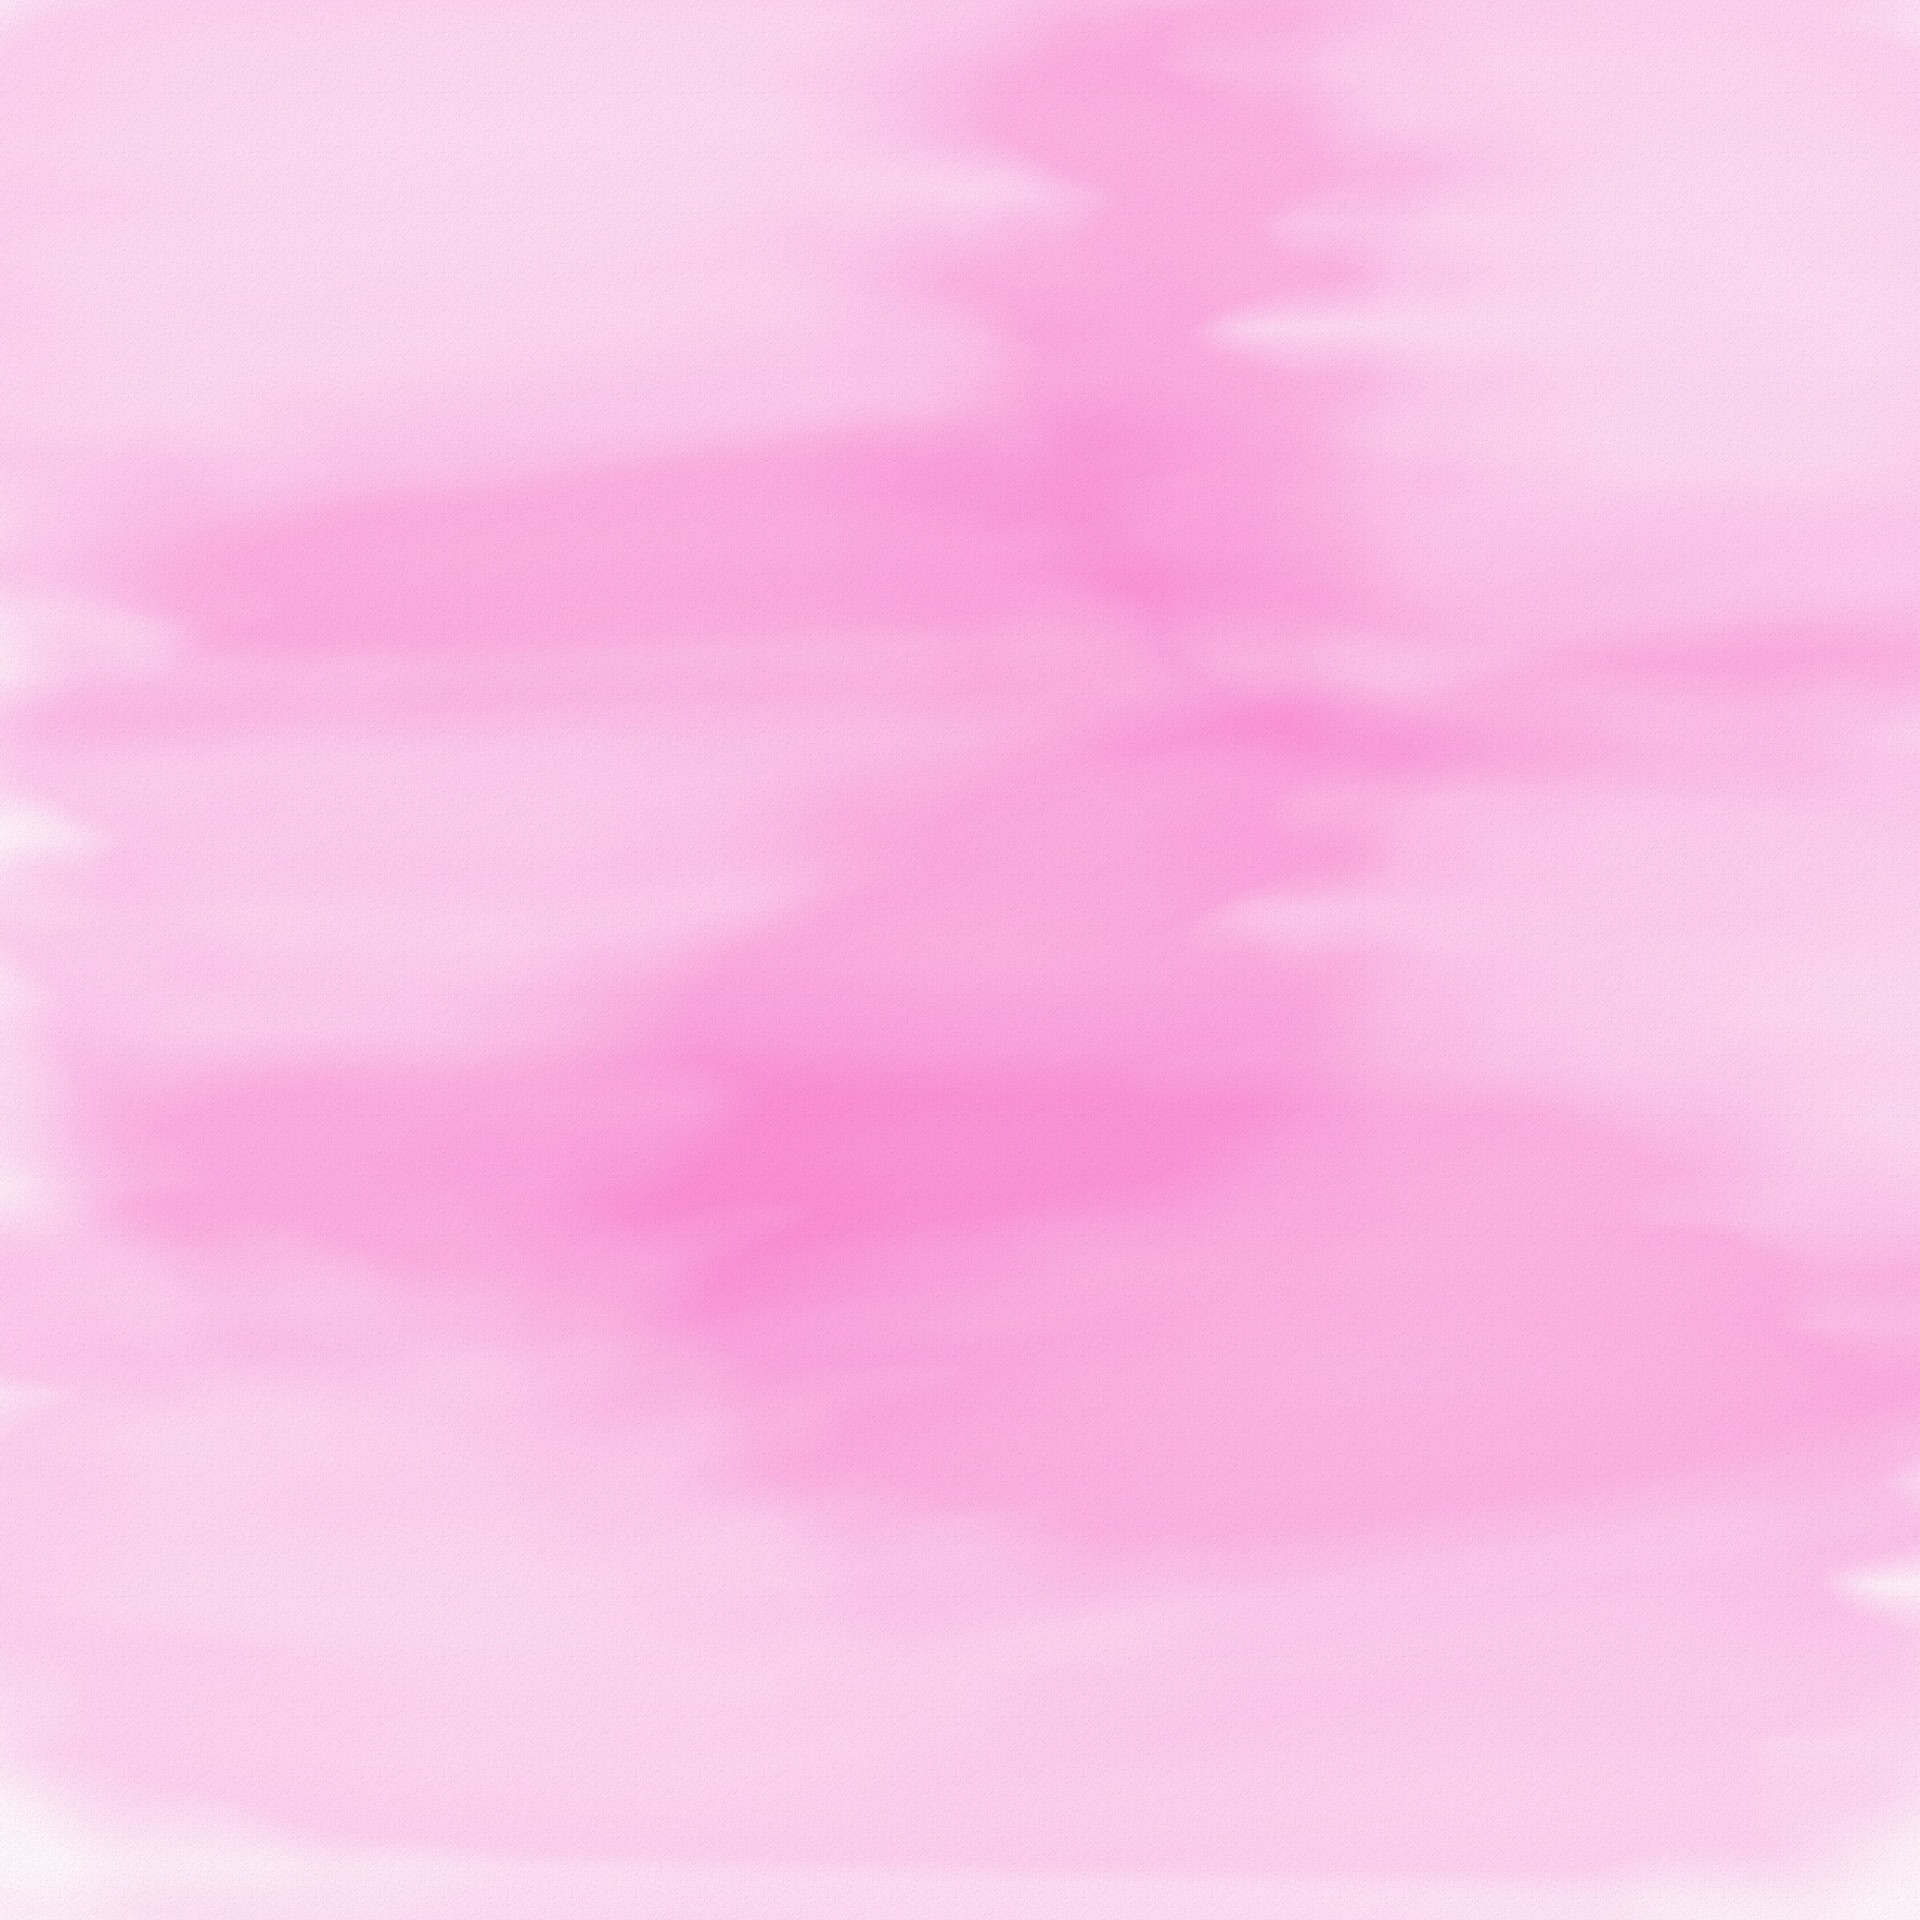 1920x1920 Watercolor Texture Background Pink